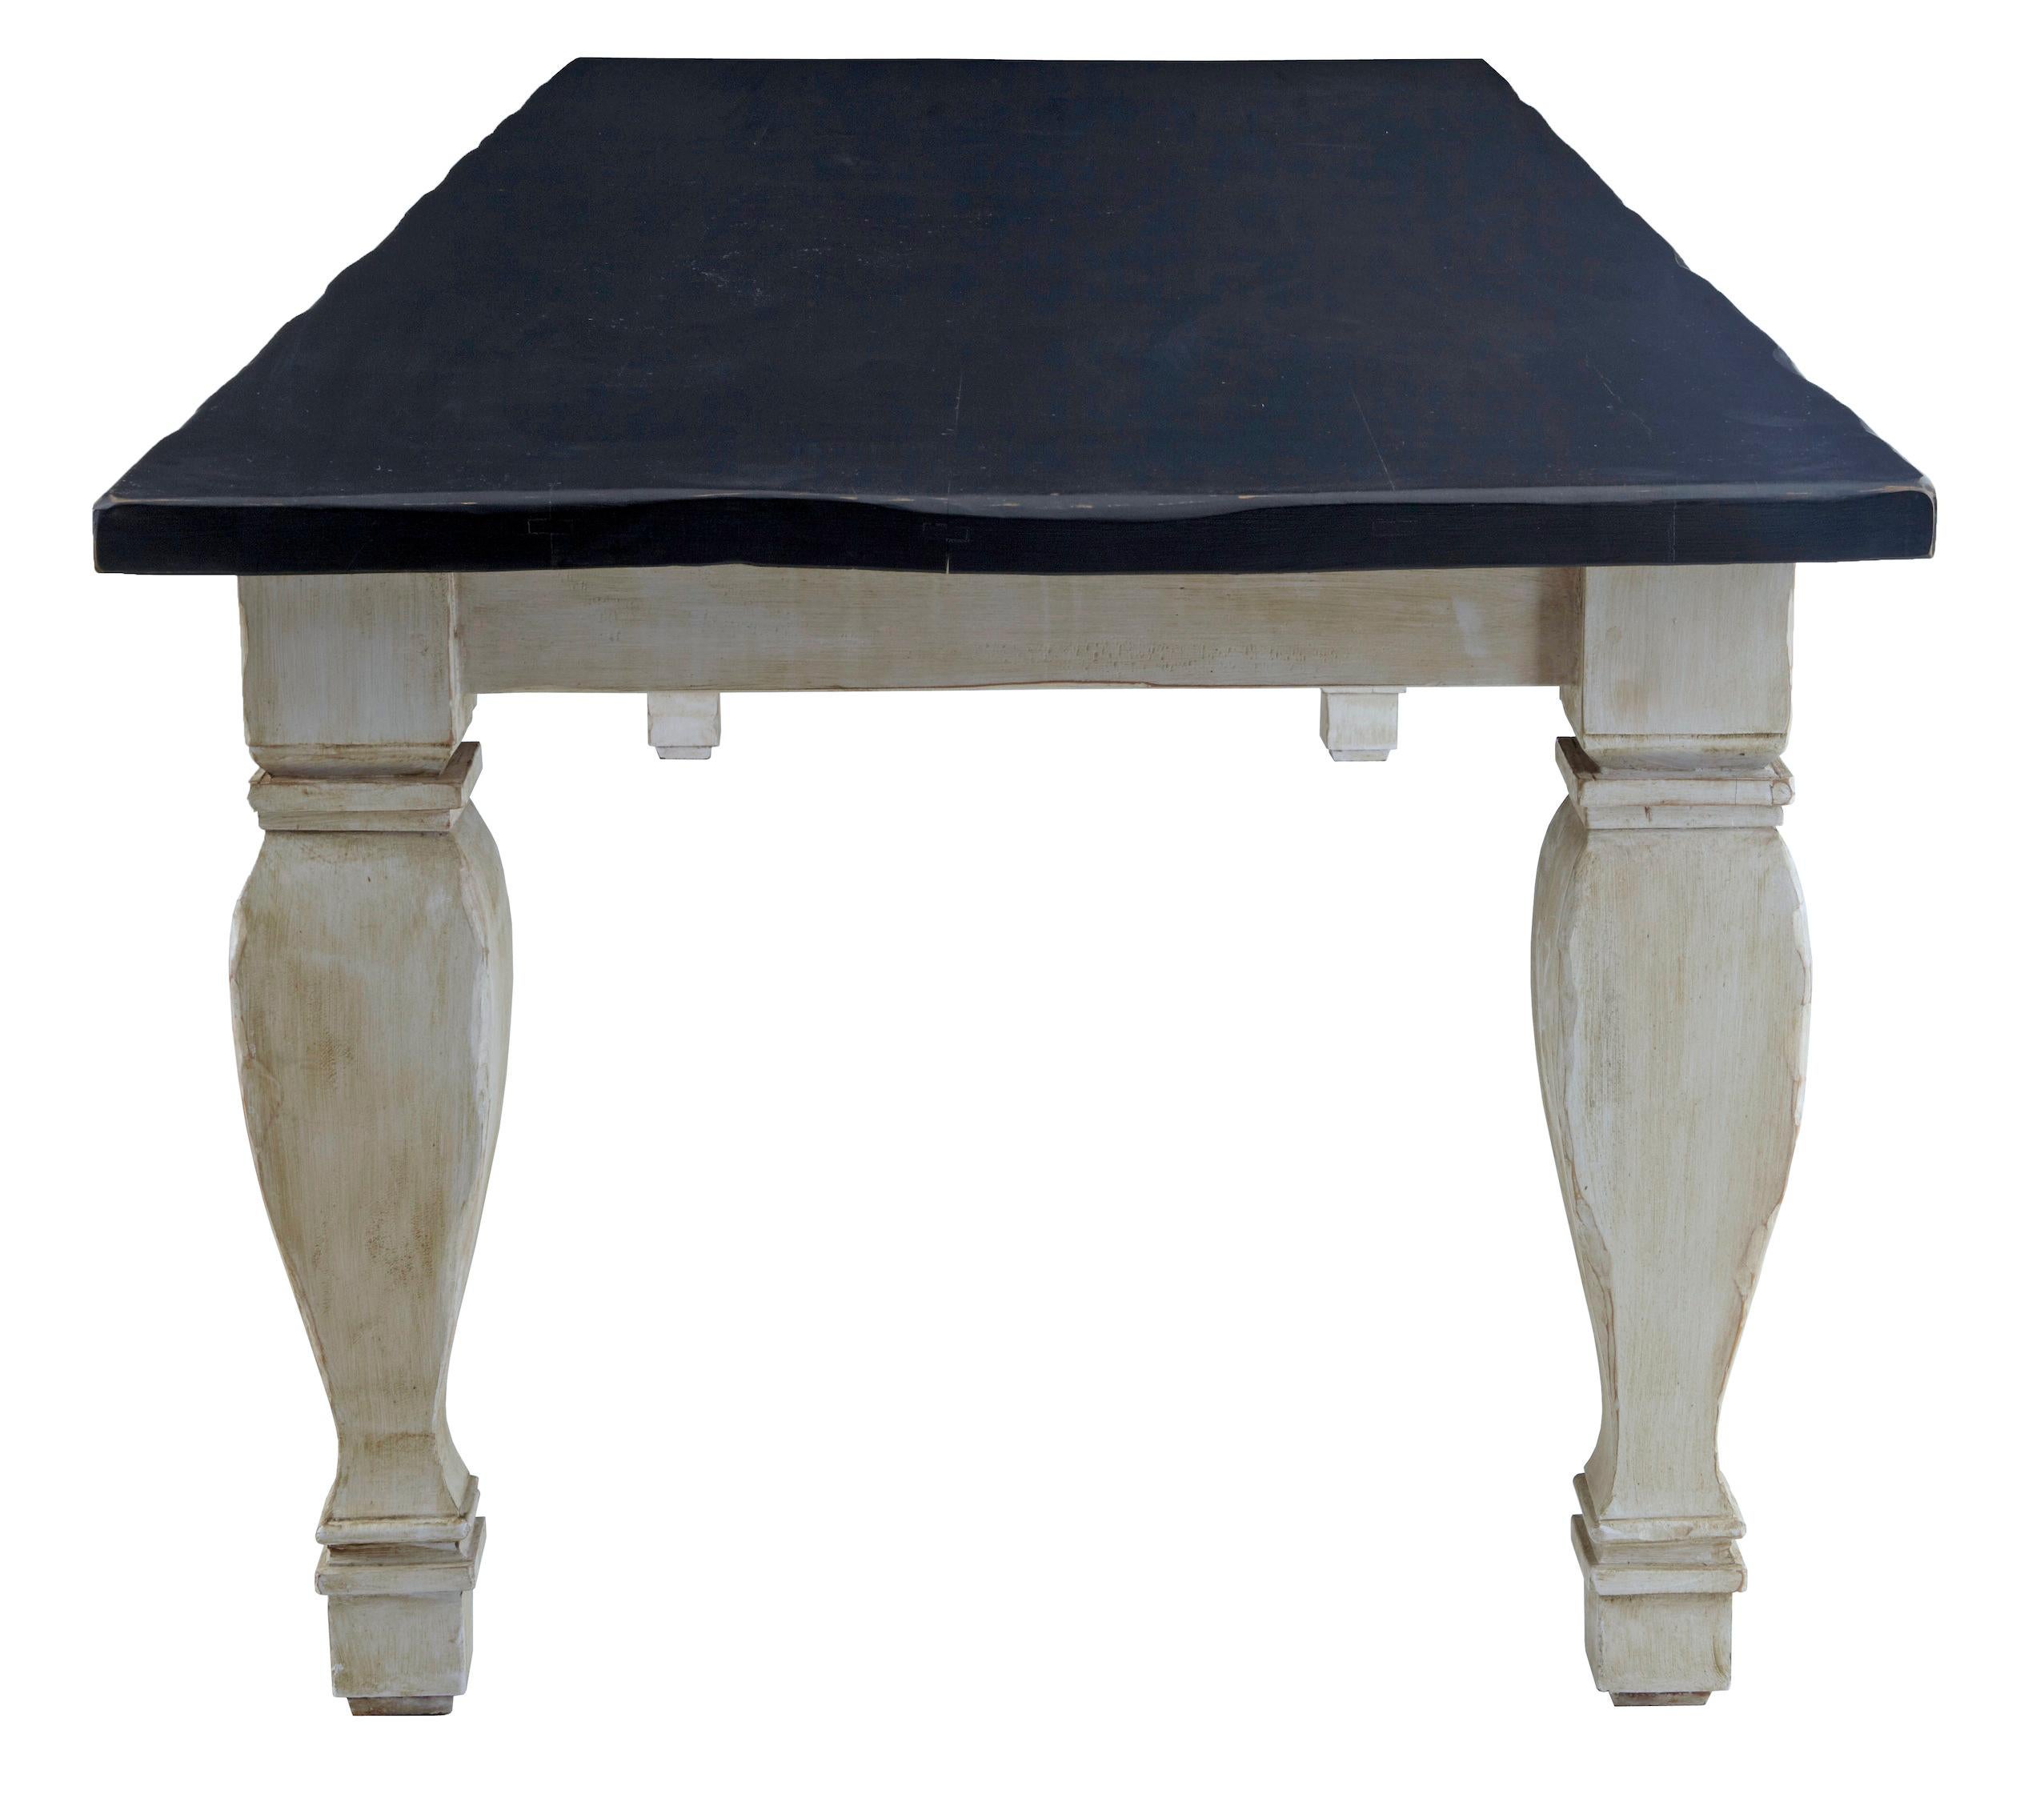 Carved hardwood rustic refectory table of large proportions, circa 1990.

At just over 3 meters long this is quite a substantial table, offering seating for 12+. Dark stained thick top with contrasting painted base in a white wash.

Expected